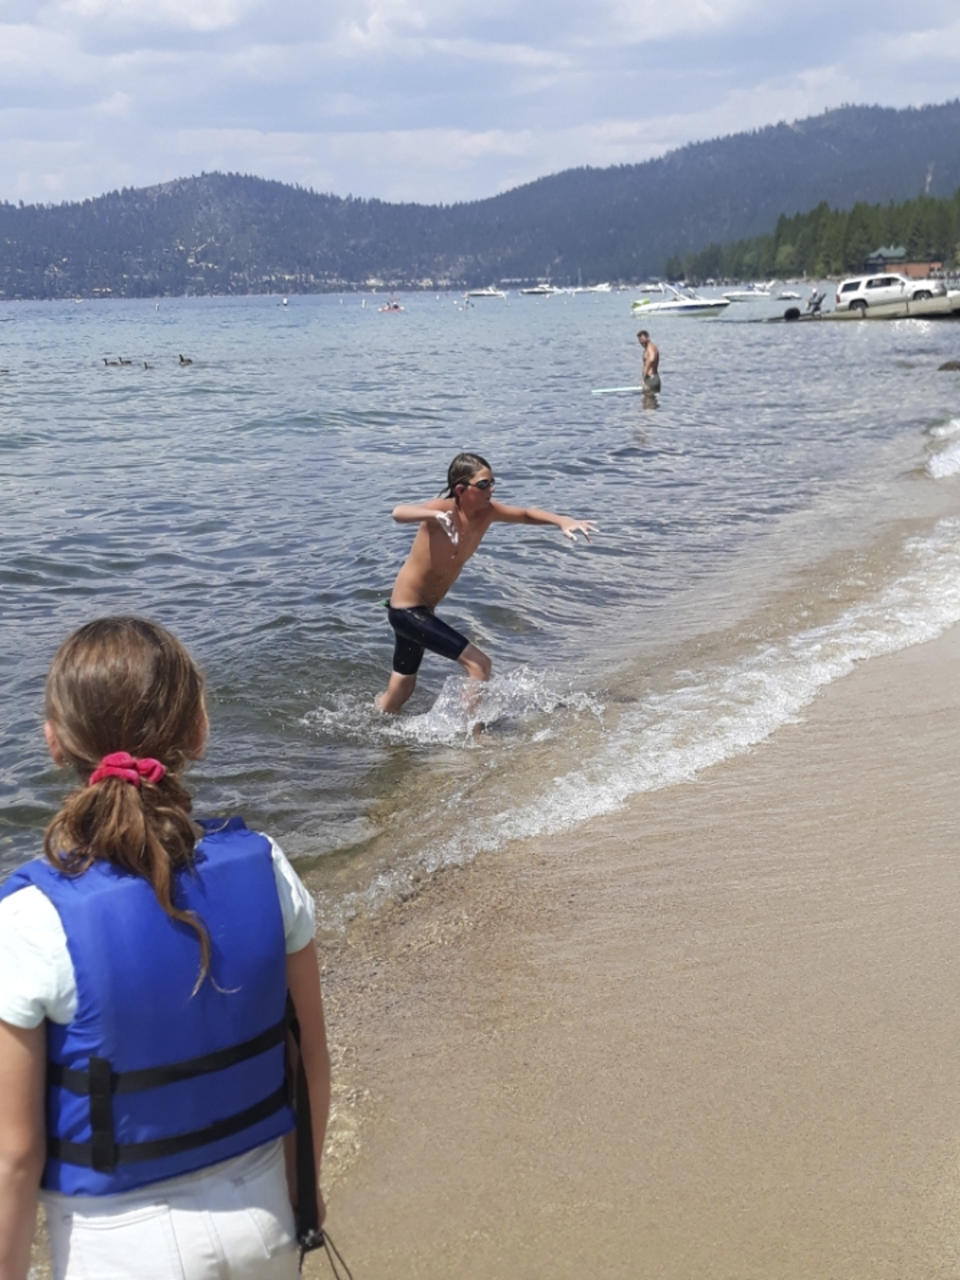 This Aug. 1, 2021 image provided by Jillian Savage shows James Savage, 14, of Los Banos, Calif. at Lake Tahoe on Aug. 1, 2021 as leaves the water after completing a swim of the entire 21.3-mile length of the alpine lake from South Lake Tahoe, California to Incline Village, Nevada. He became the youngest person ever to make the swim and complete the coveted Tahoe Triple Crown. He completed the two other legs of the triple crown earlier, each 10 miles are longer. (AP Photo/By Jillian Savage).